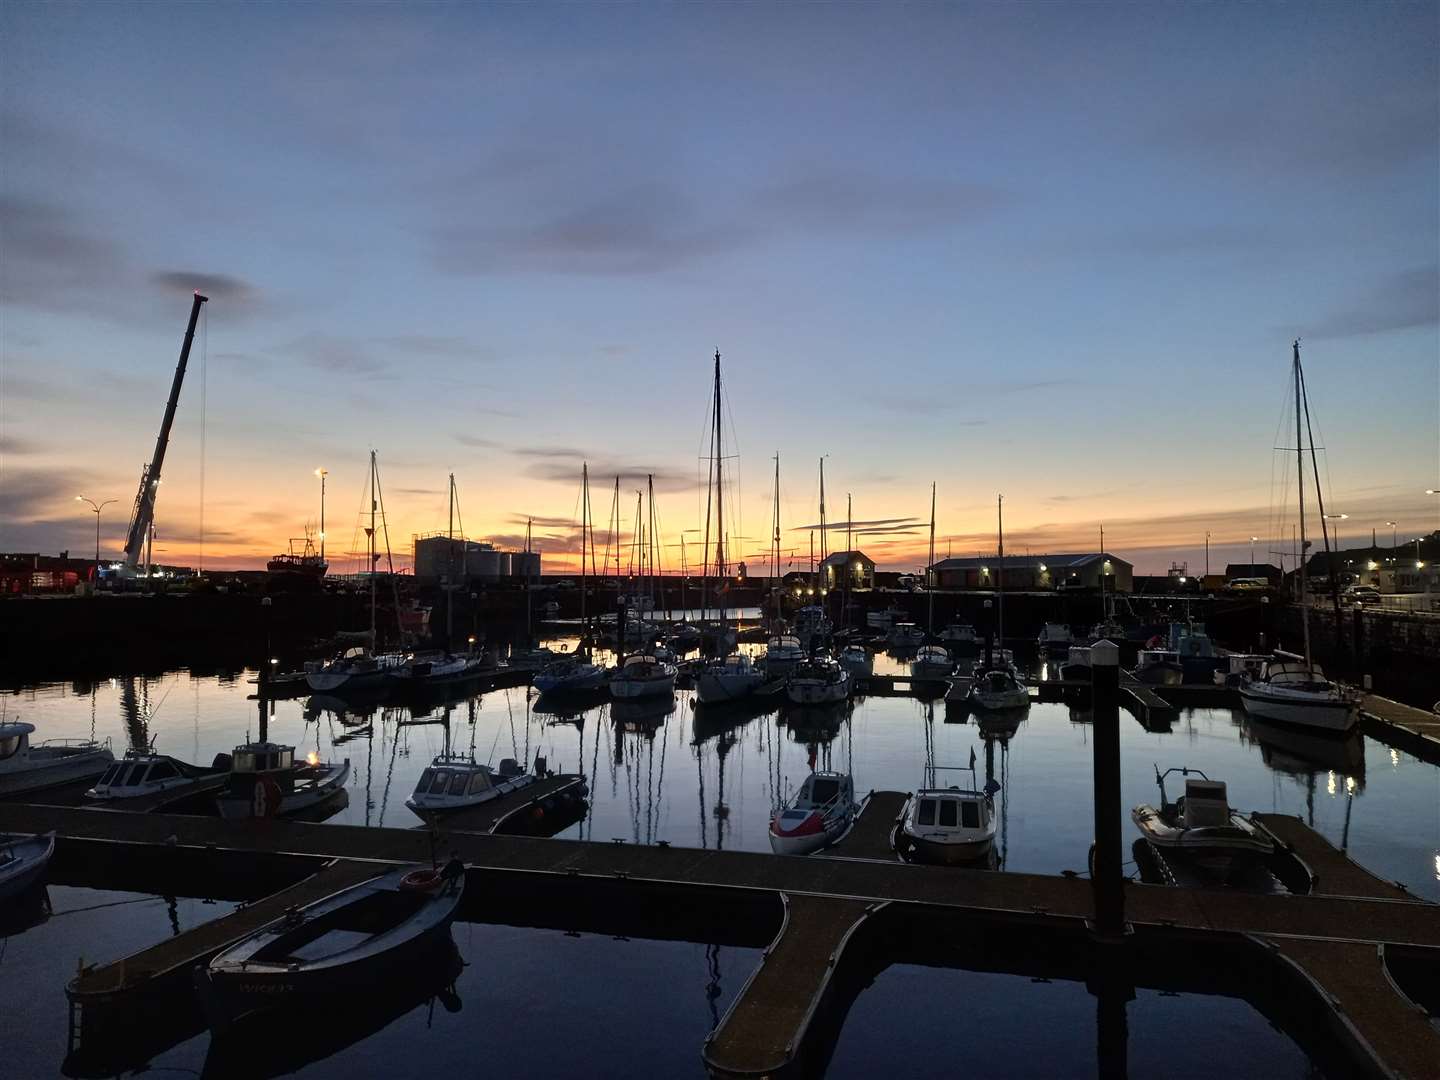 The calm before the storm... Matthew Towe sent this picture of Wick Harbour.